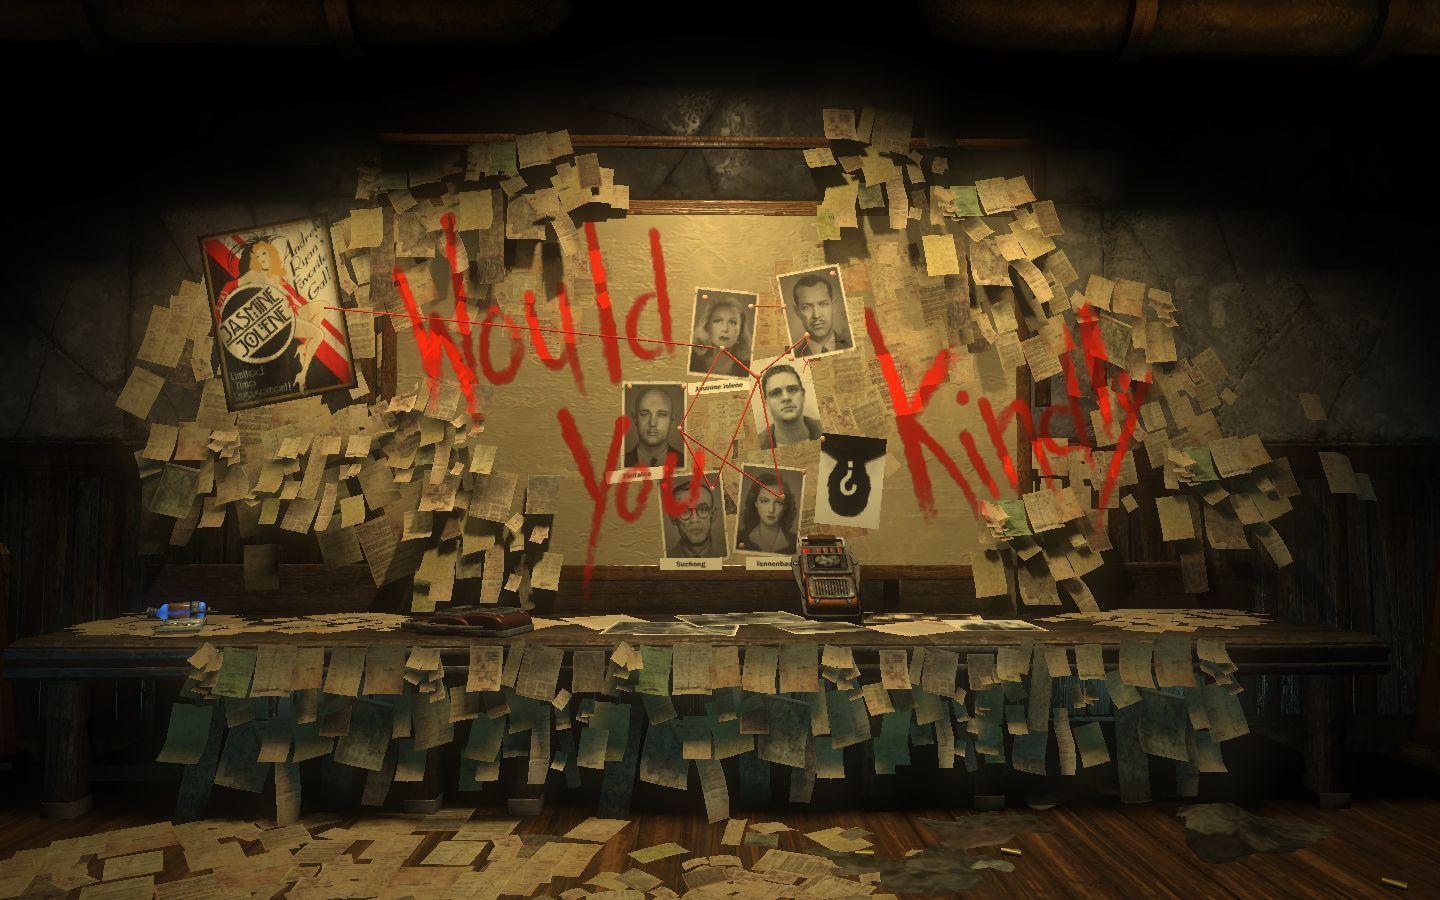 Free Would You Kindly BioShock Wallpaper, Free Would You Kindly